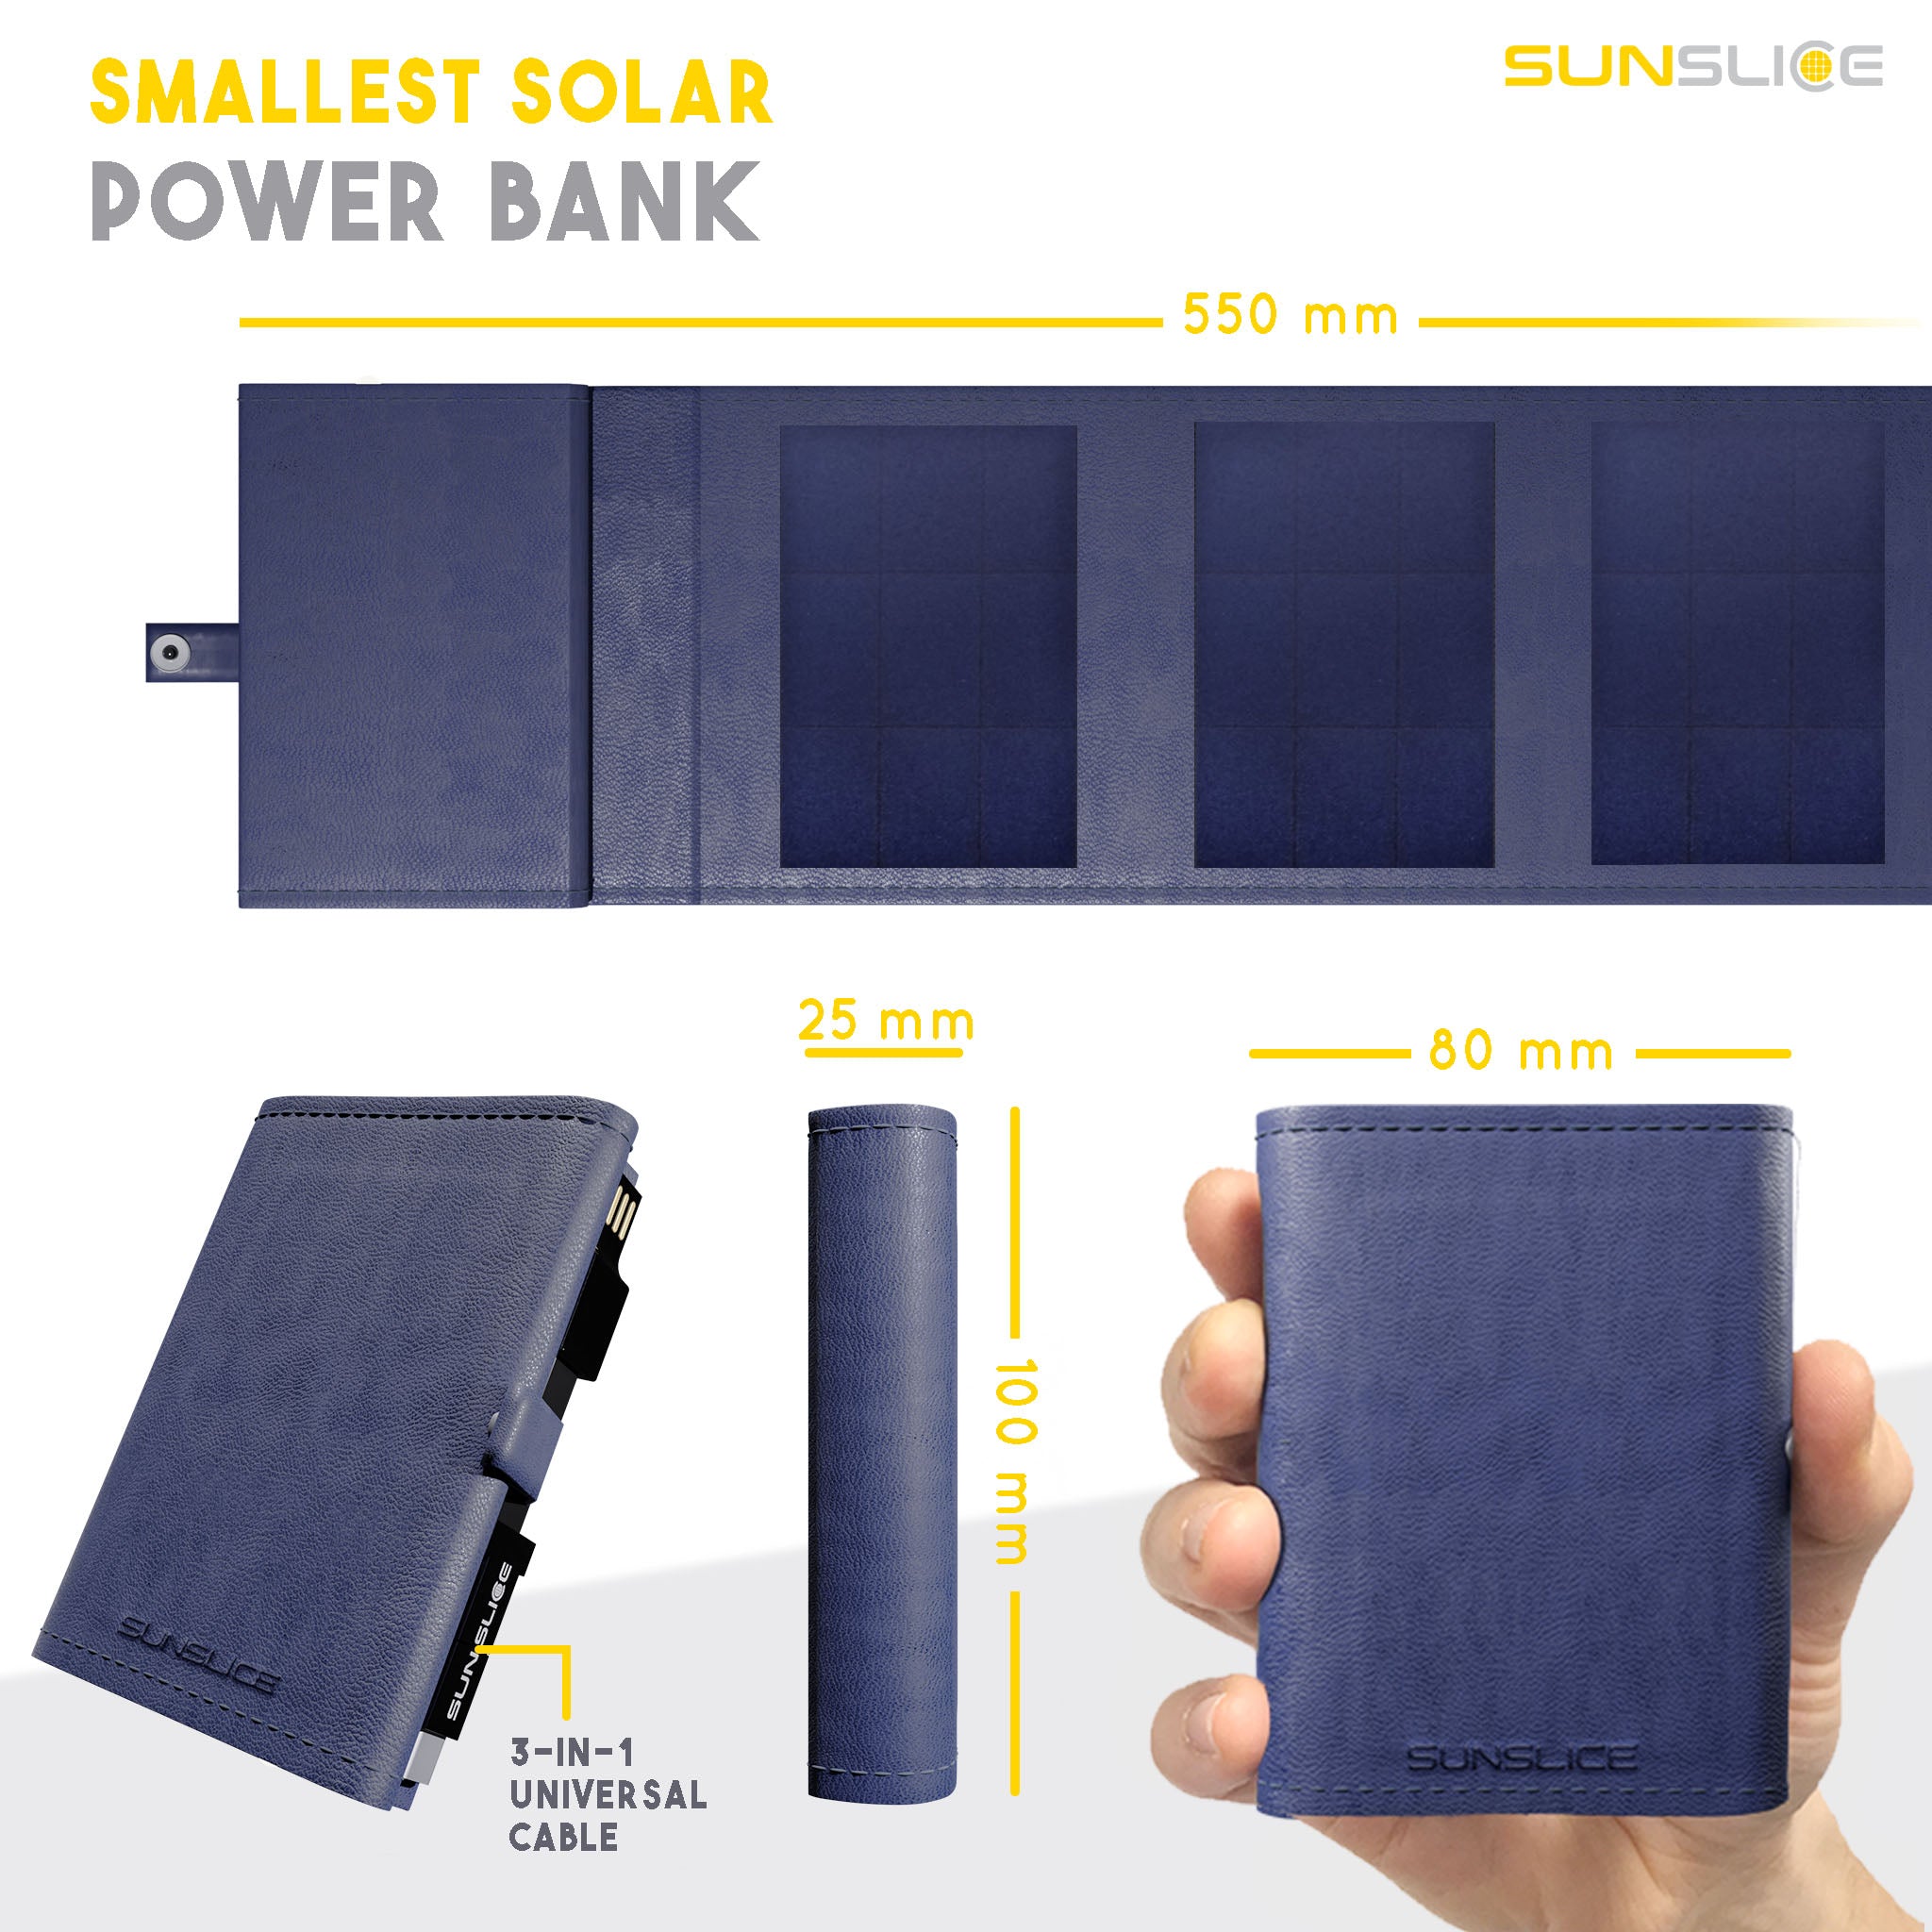 technical specification photon smallest solar power bank. Size: close : 100mm, 25mm, 80mm. Open : 550mm , 3mm,80 mm